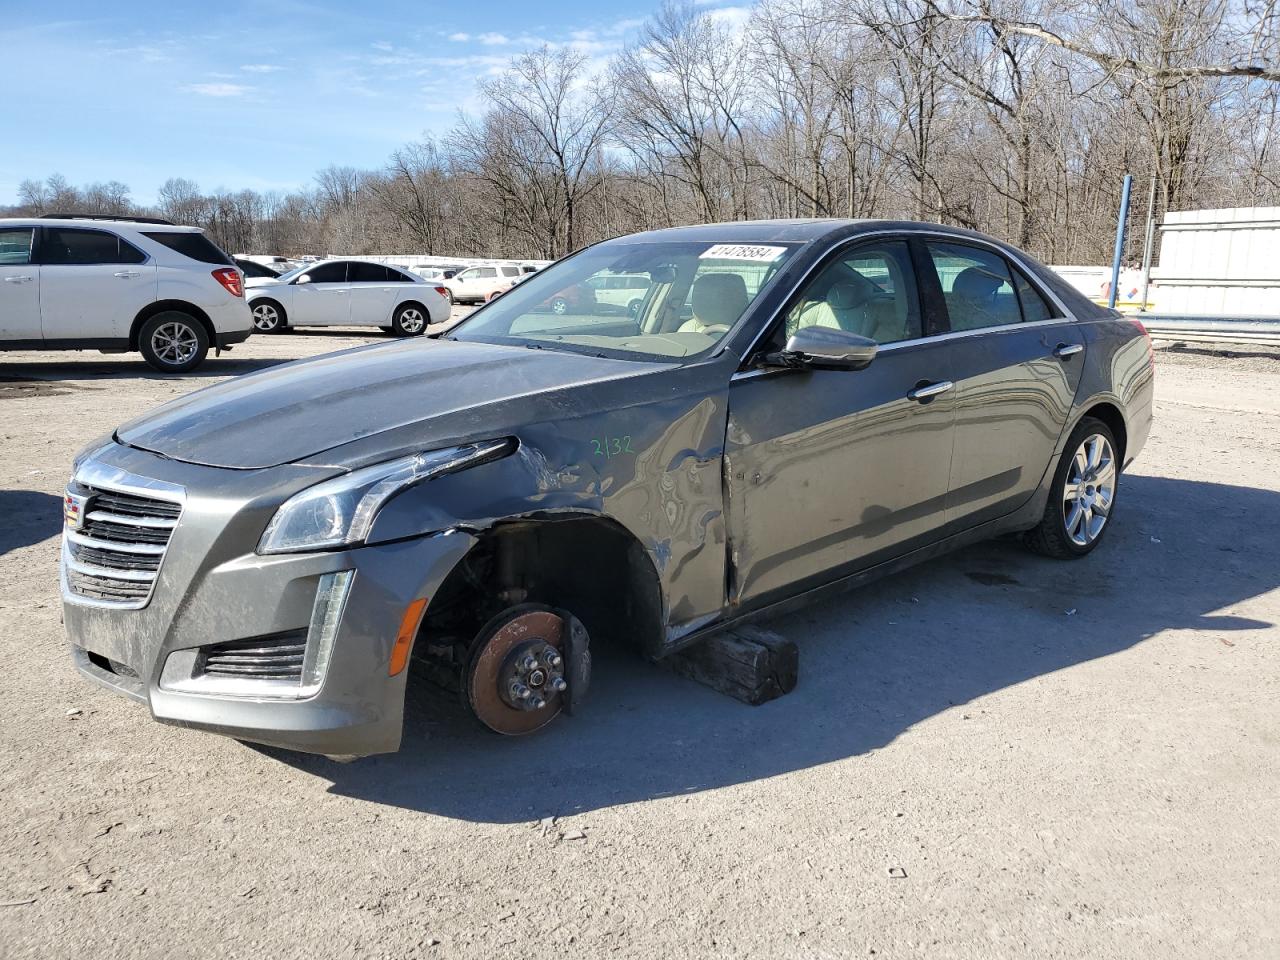 vin: 1G6AX5SSXG0186297 1G6AX5SSXG0186297 2016 cadillac cts 3600 for Sale in 16117 3772, Pa - Pittsburgh North, Ellwood City, USA